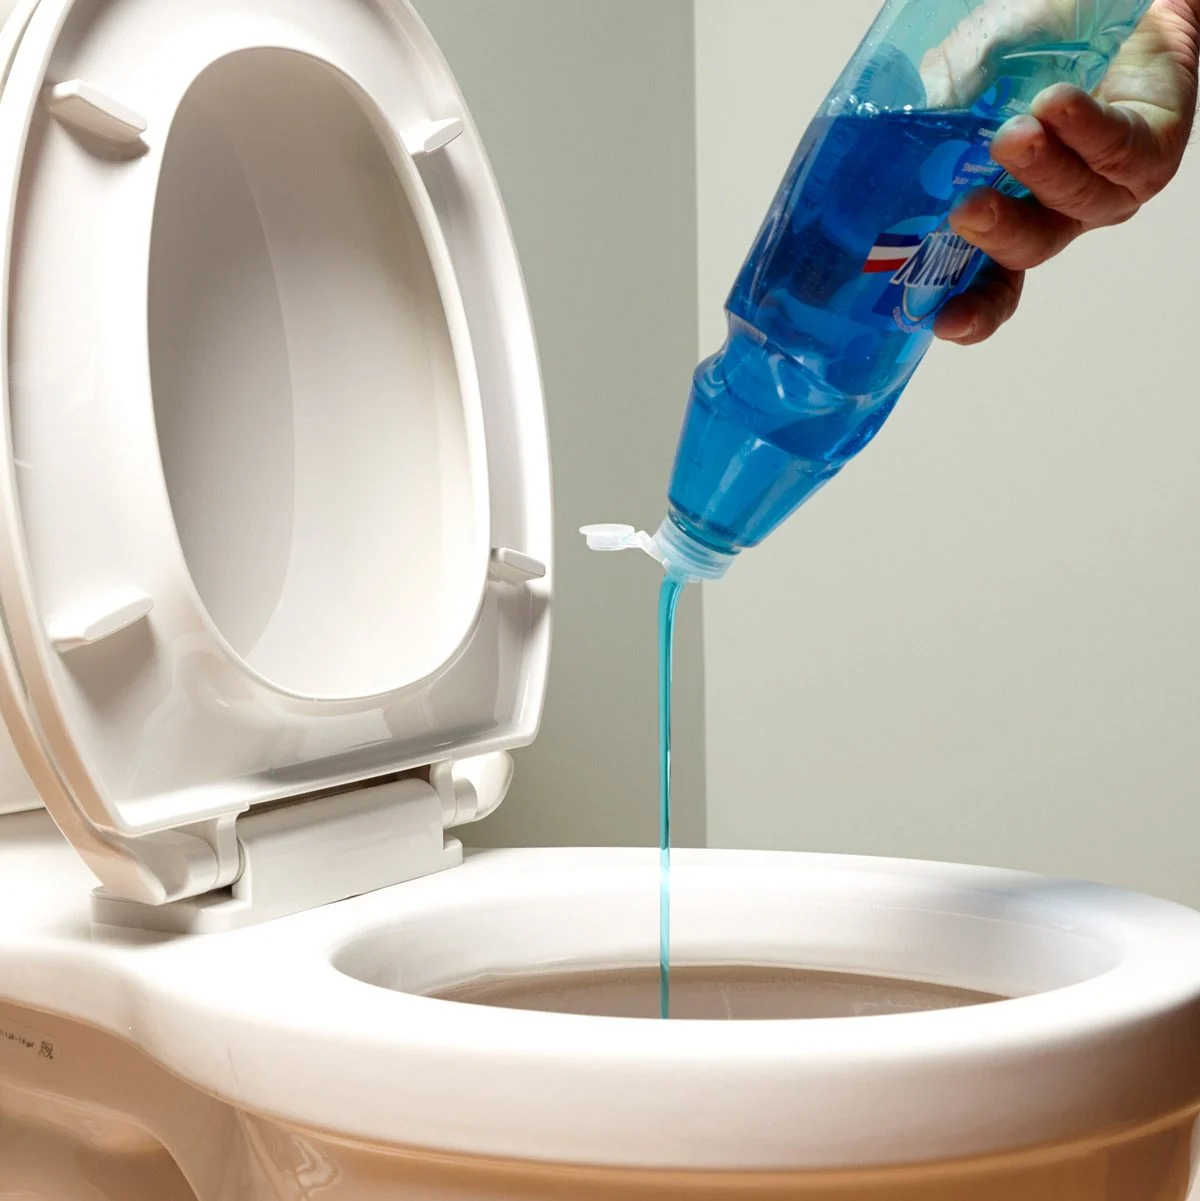 How to Unblock a Badly Blocked Toilet Without a Plunger